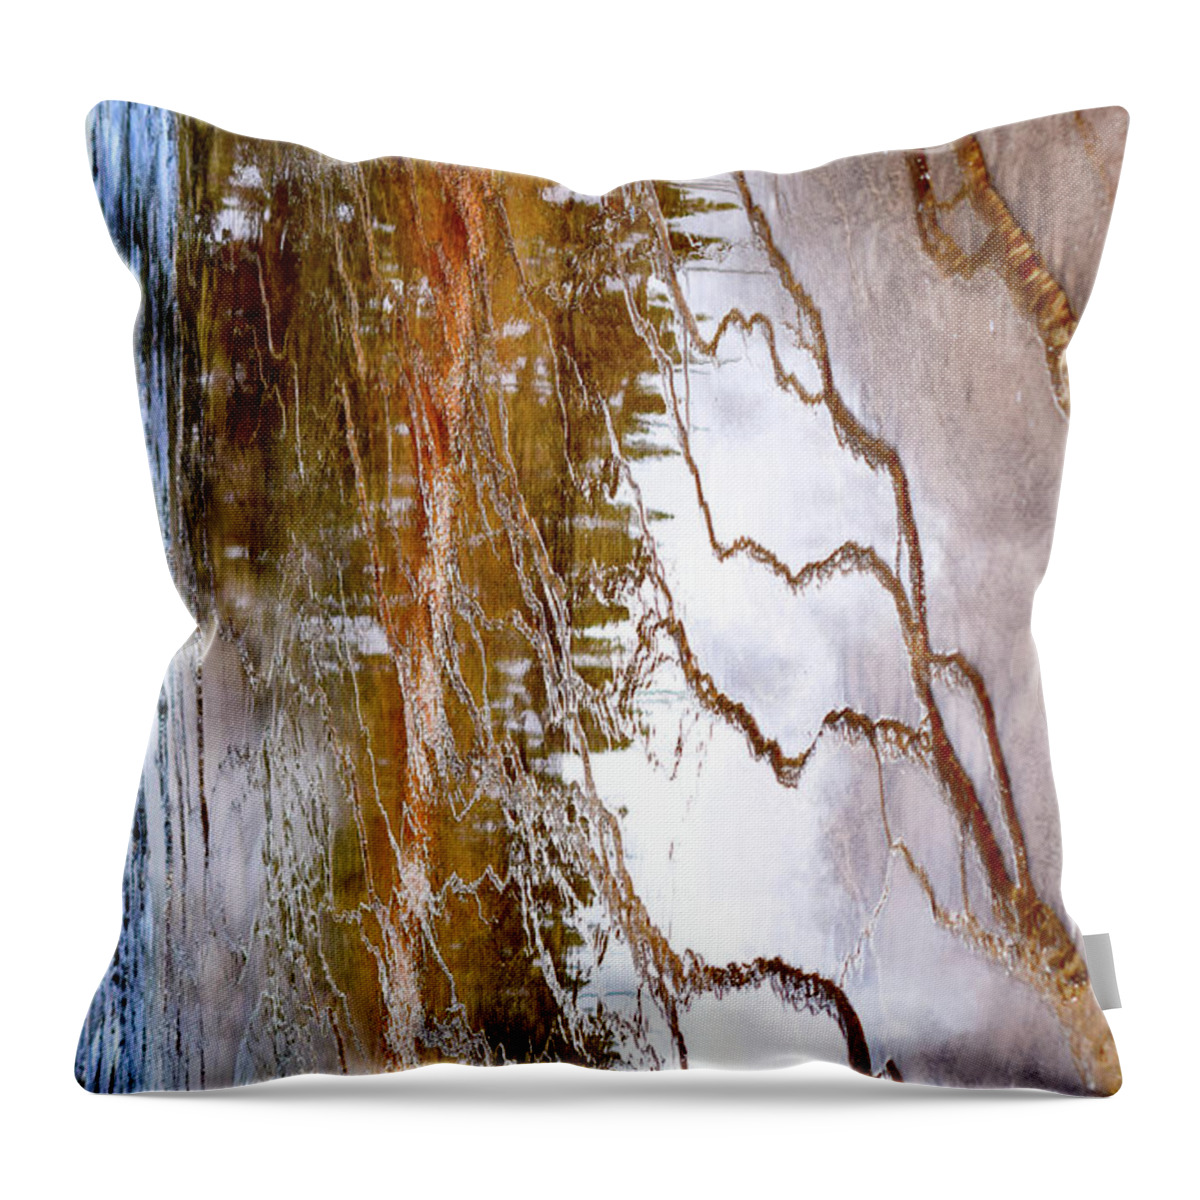 Wyoming Images Throw Pillow featuring the photograph Abstract Yellowstone Photography 20180518-103 by Rowan Lyford